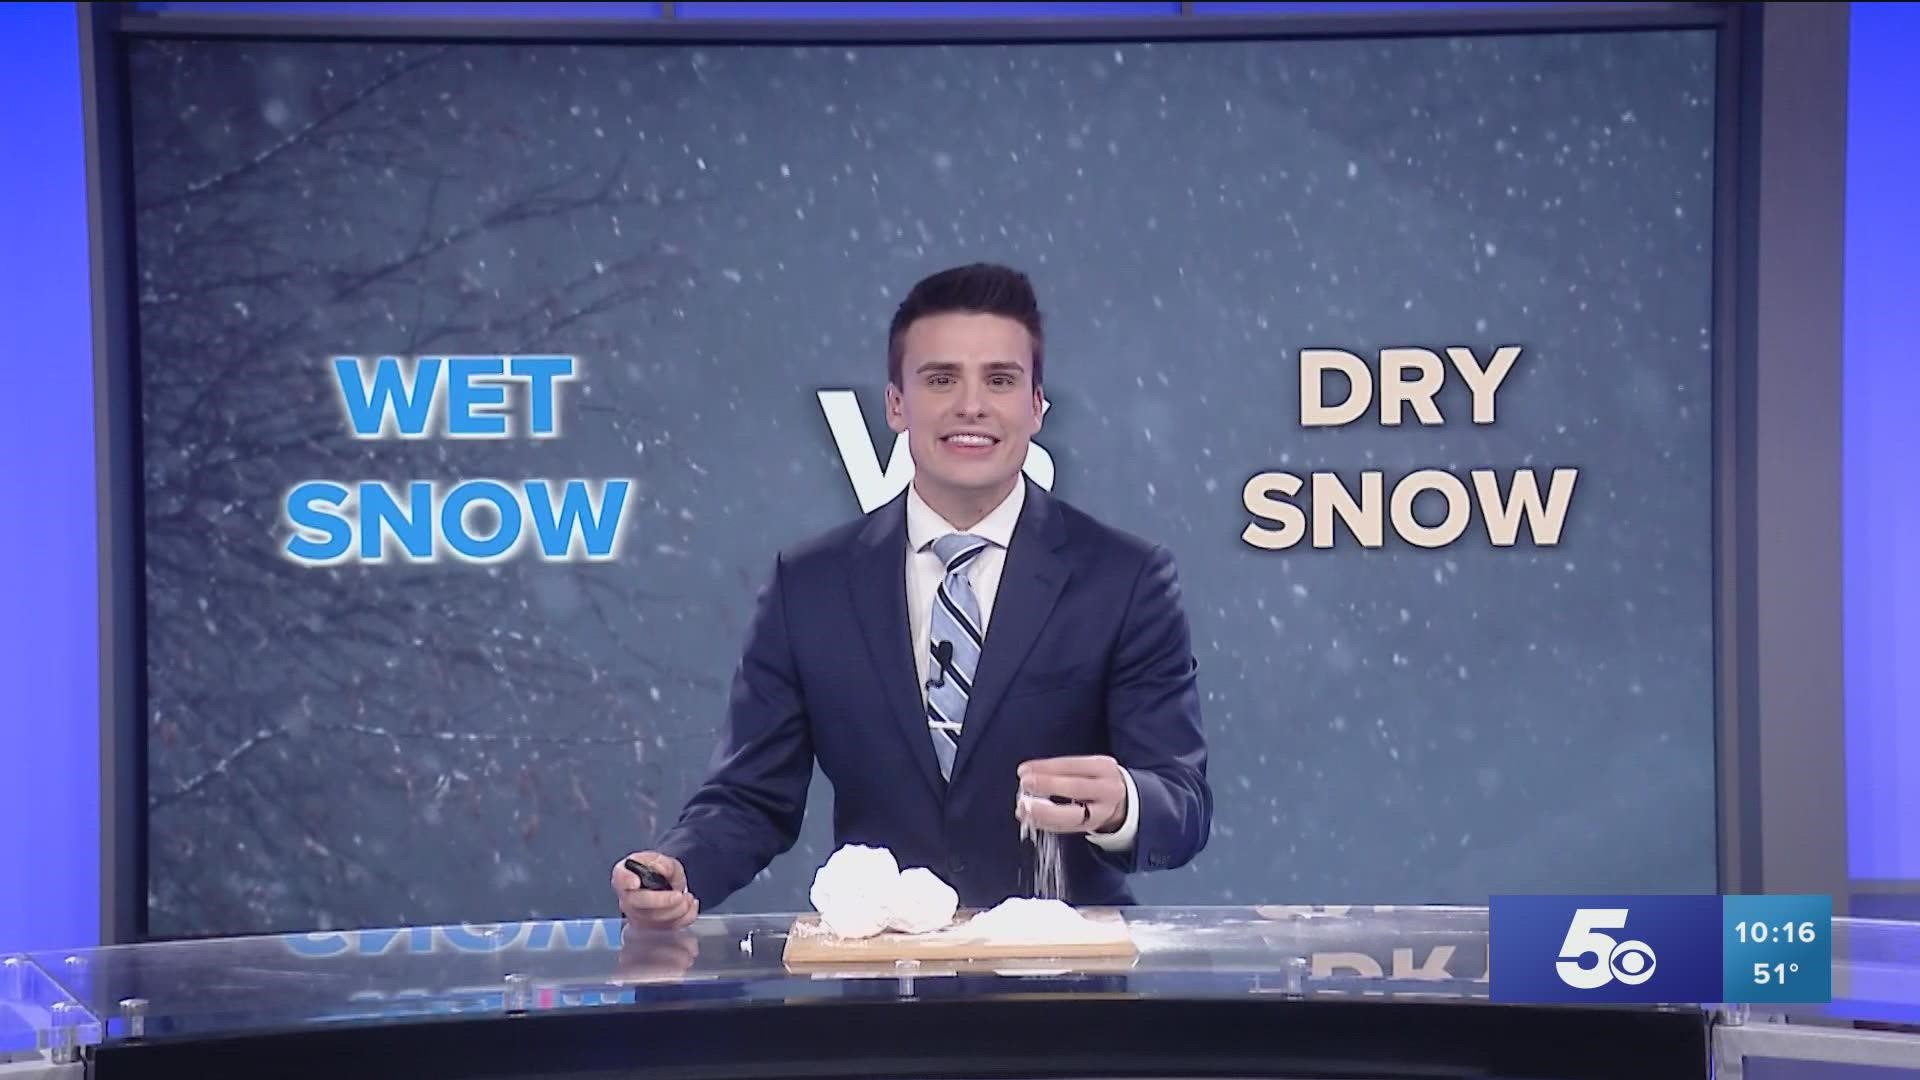 Sometimes snows pack really well to make great snowballs, and other times it's dry and powdery. How do meteorologists forecast the difference?